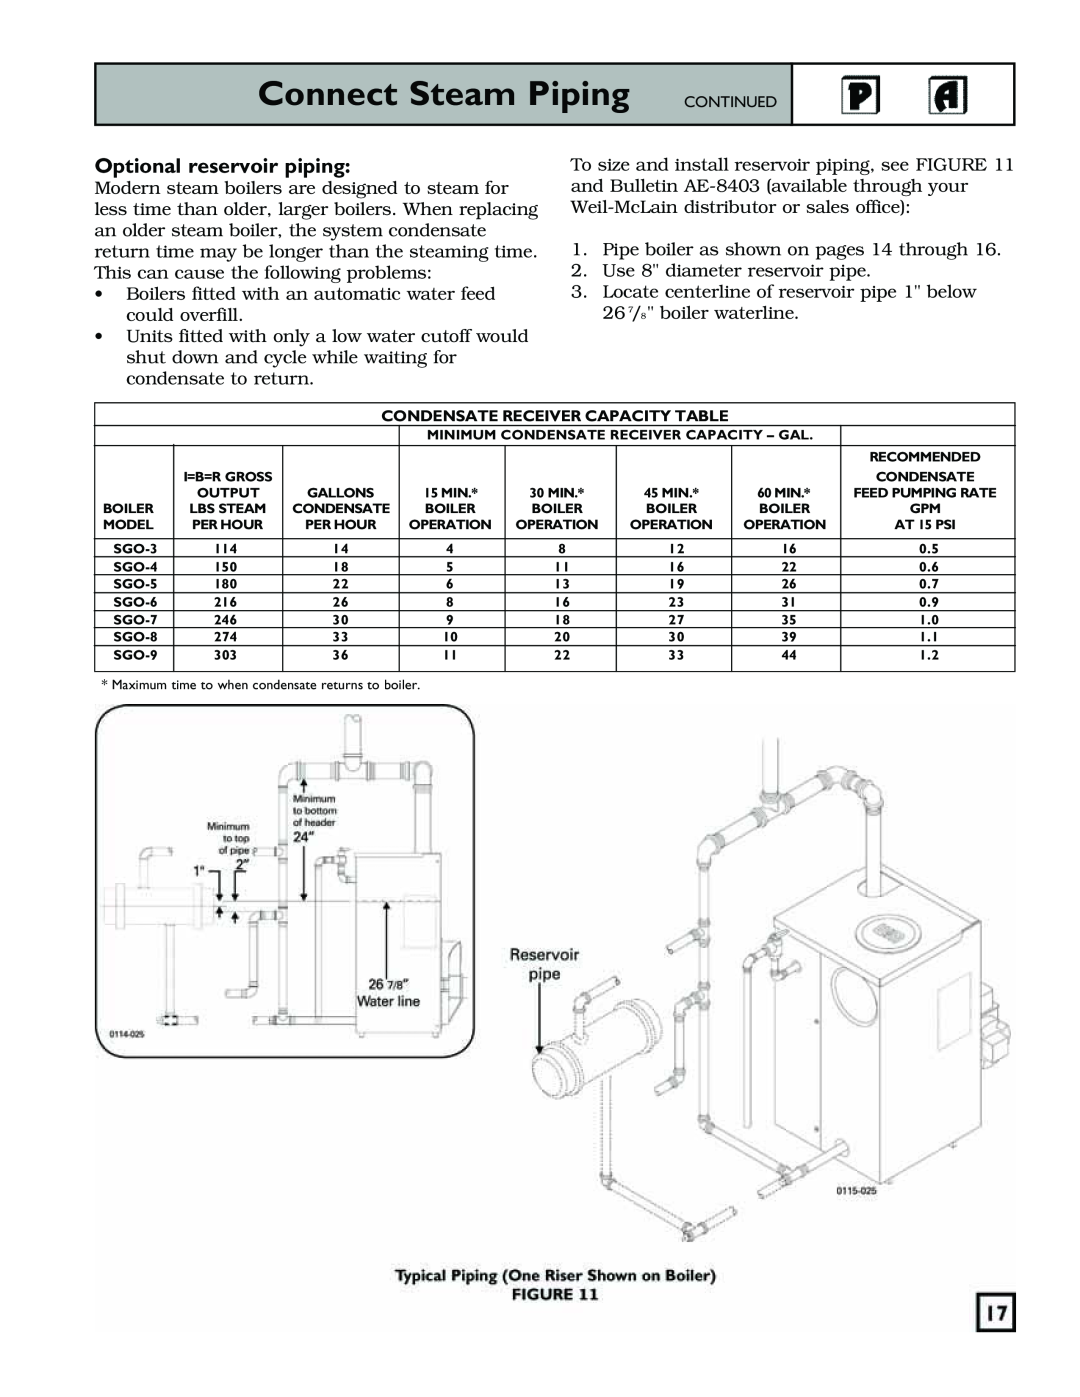 Weil-McLain 550-141-829/1201 manual Optional reservoir piping, Connect Steam Piping CONTINUED 